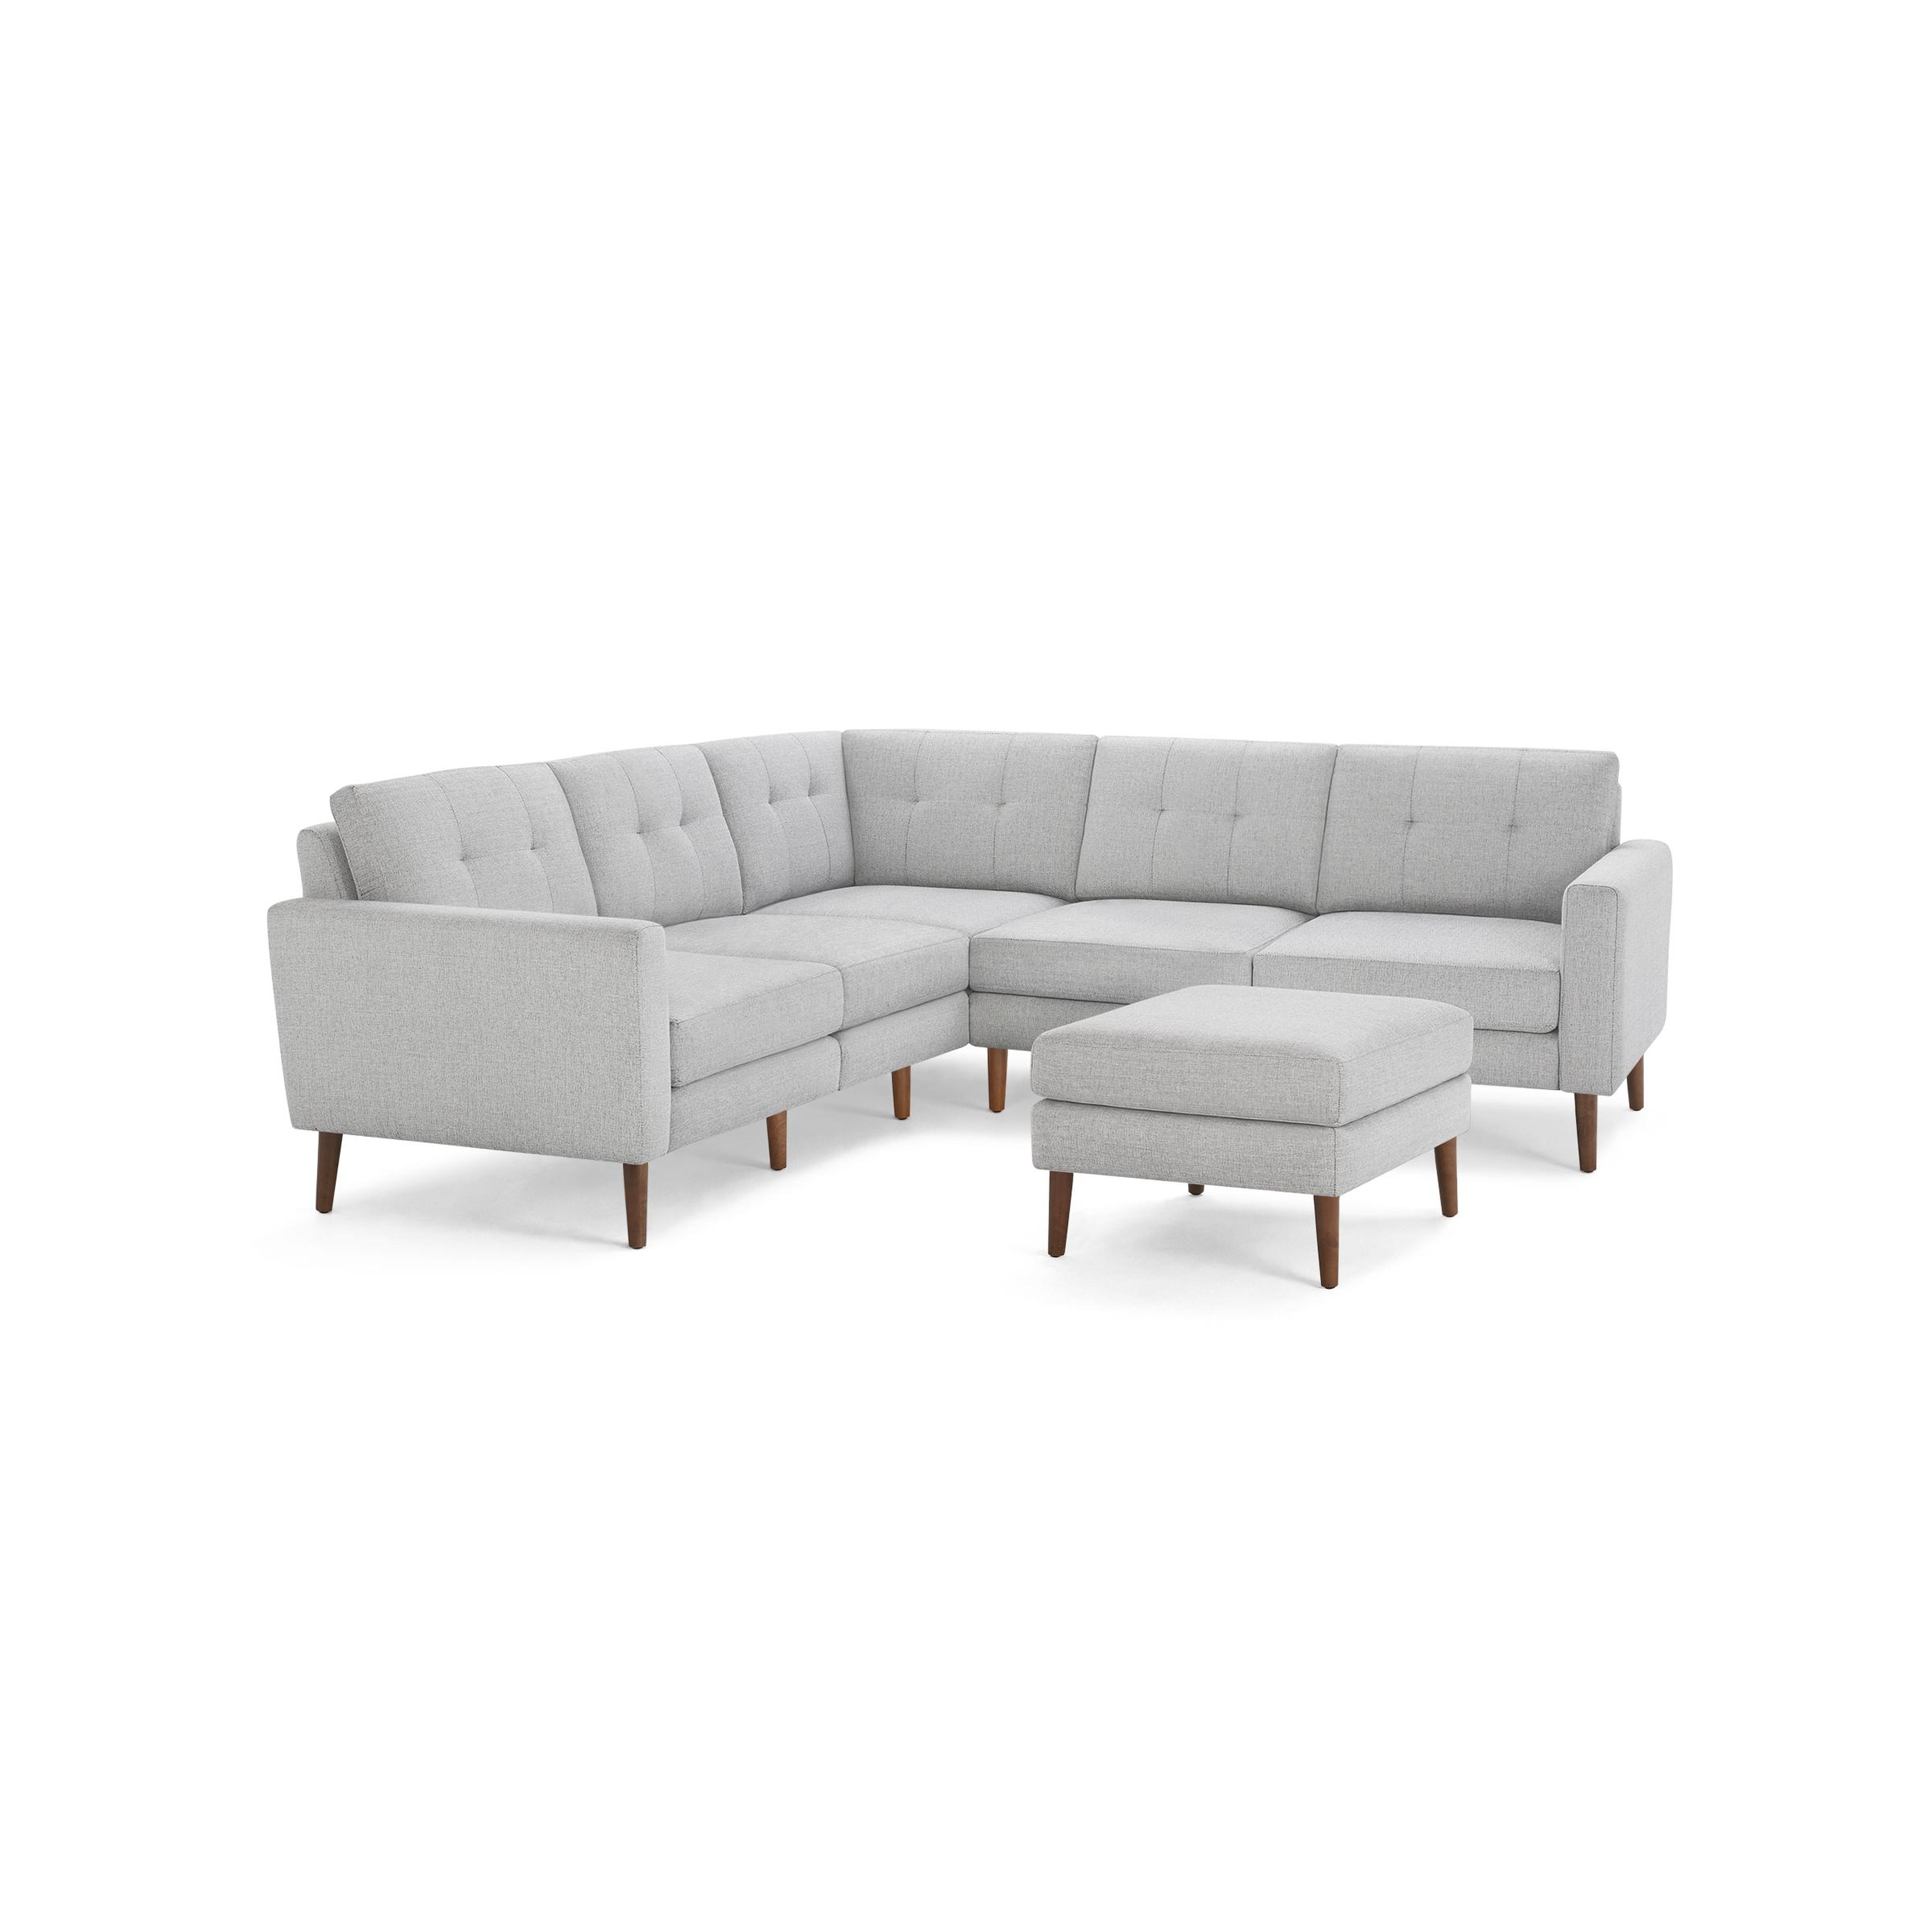 The Nomad 5-Seat Corner Sectional with Ottoman in Crushed Gravel, Walnut Legs - Burrow